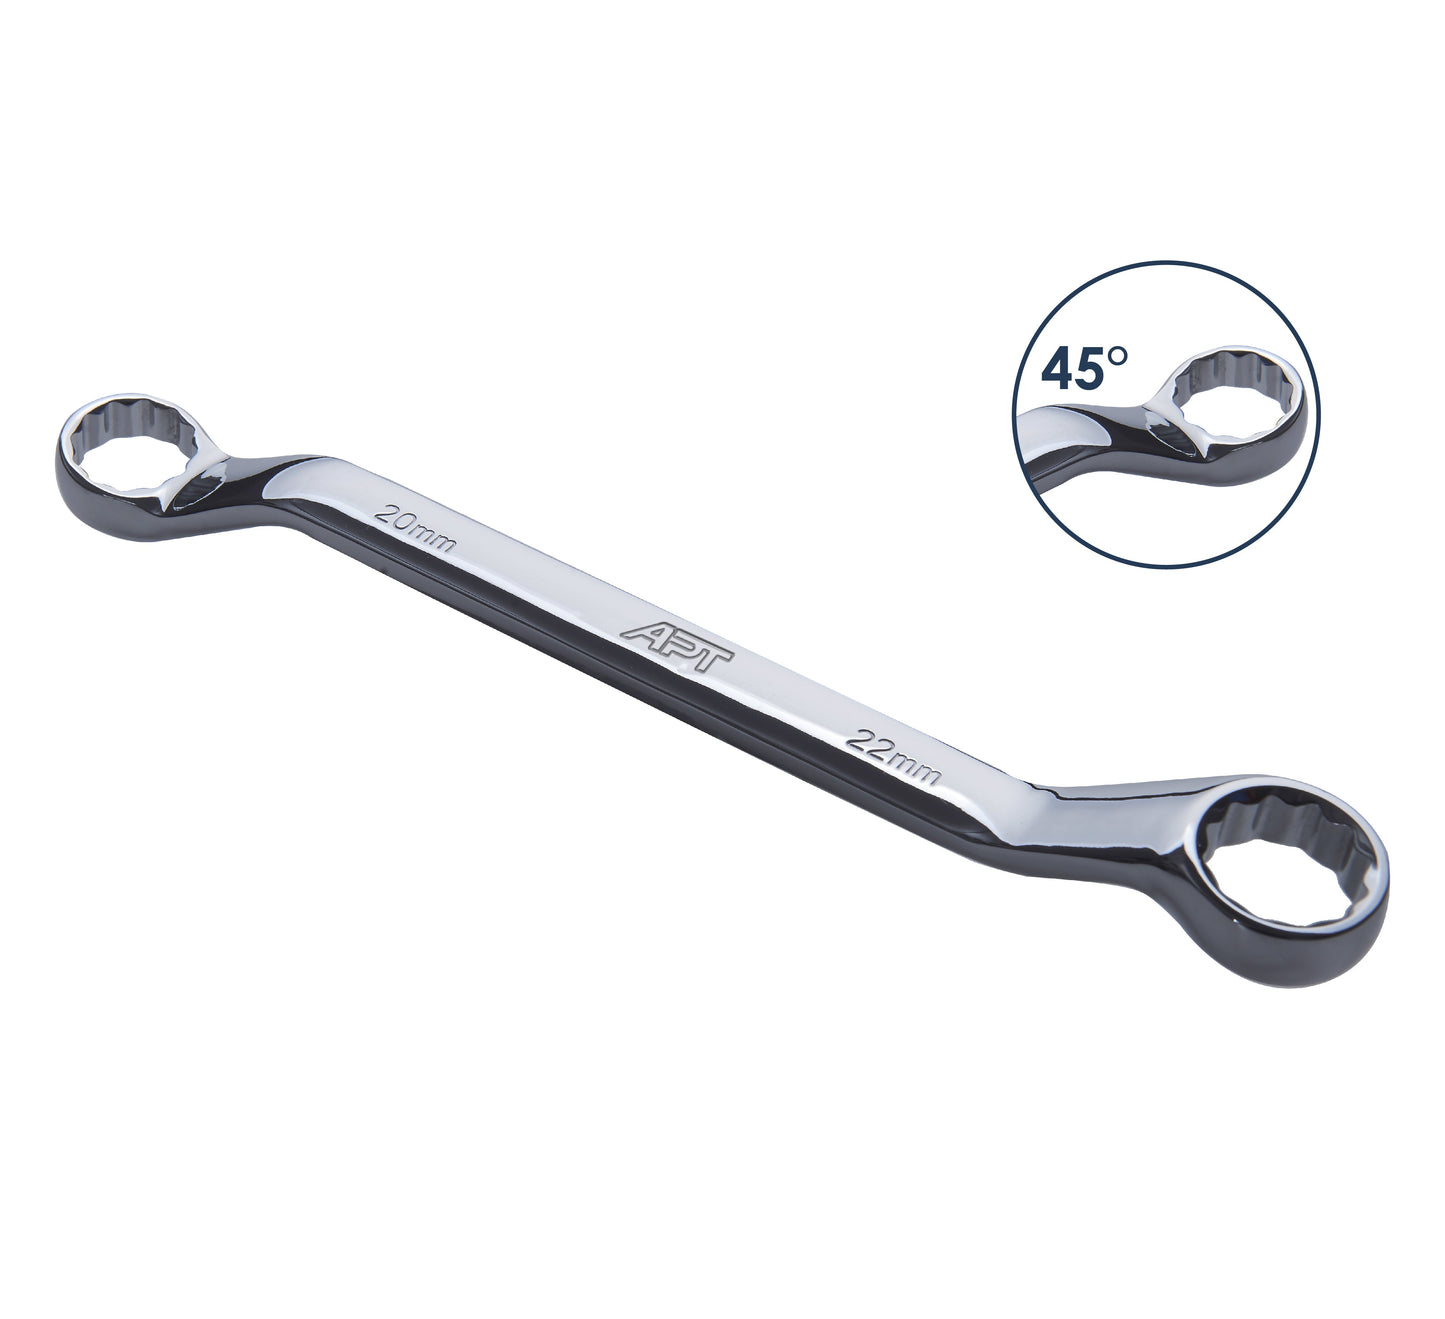 APT DOUBLE OFFSET RING WRENCH BRIGHT SATIN FINISH PP CARD HOLDER CR-V 14X15MM-AH201401-14X15